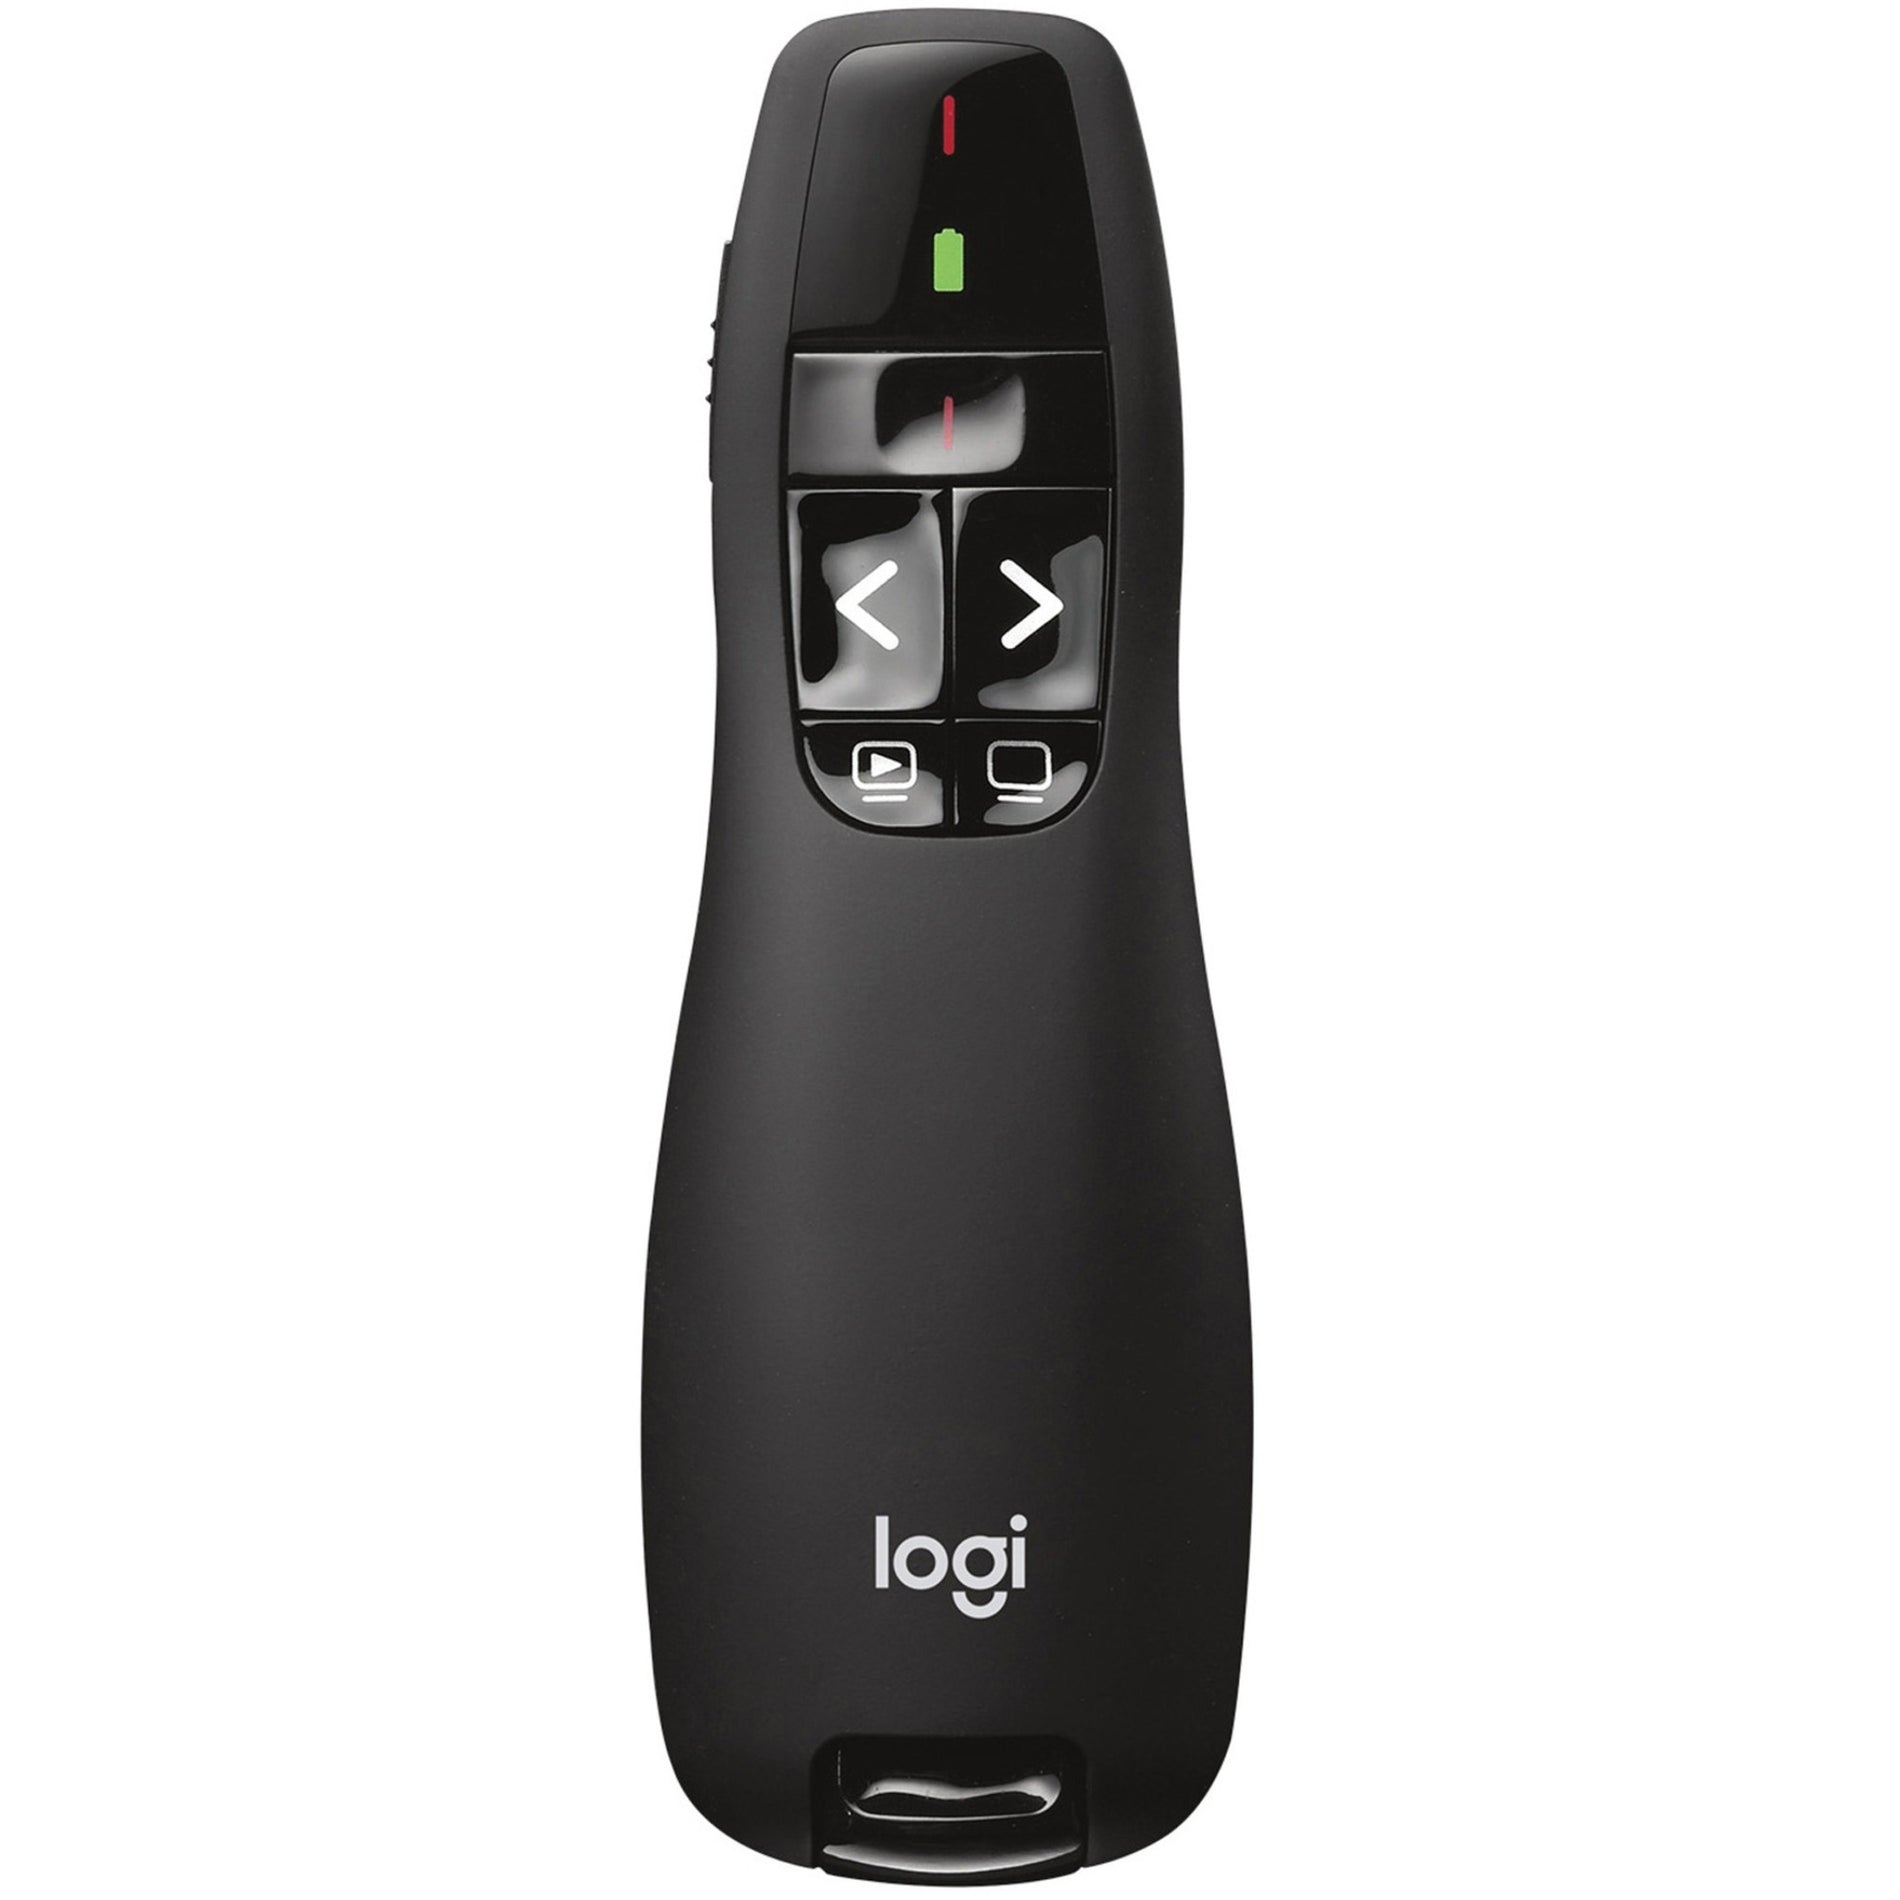 Logitech 910-001354 R400 Wireless Presenter, Red Laser Pointer, Plug-and-Play, Carrying Case